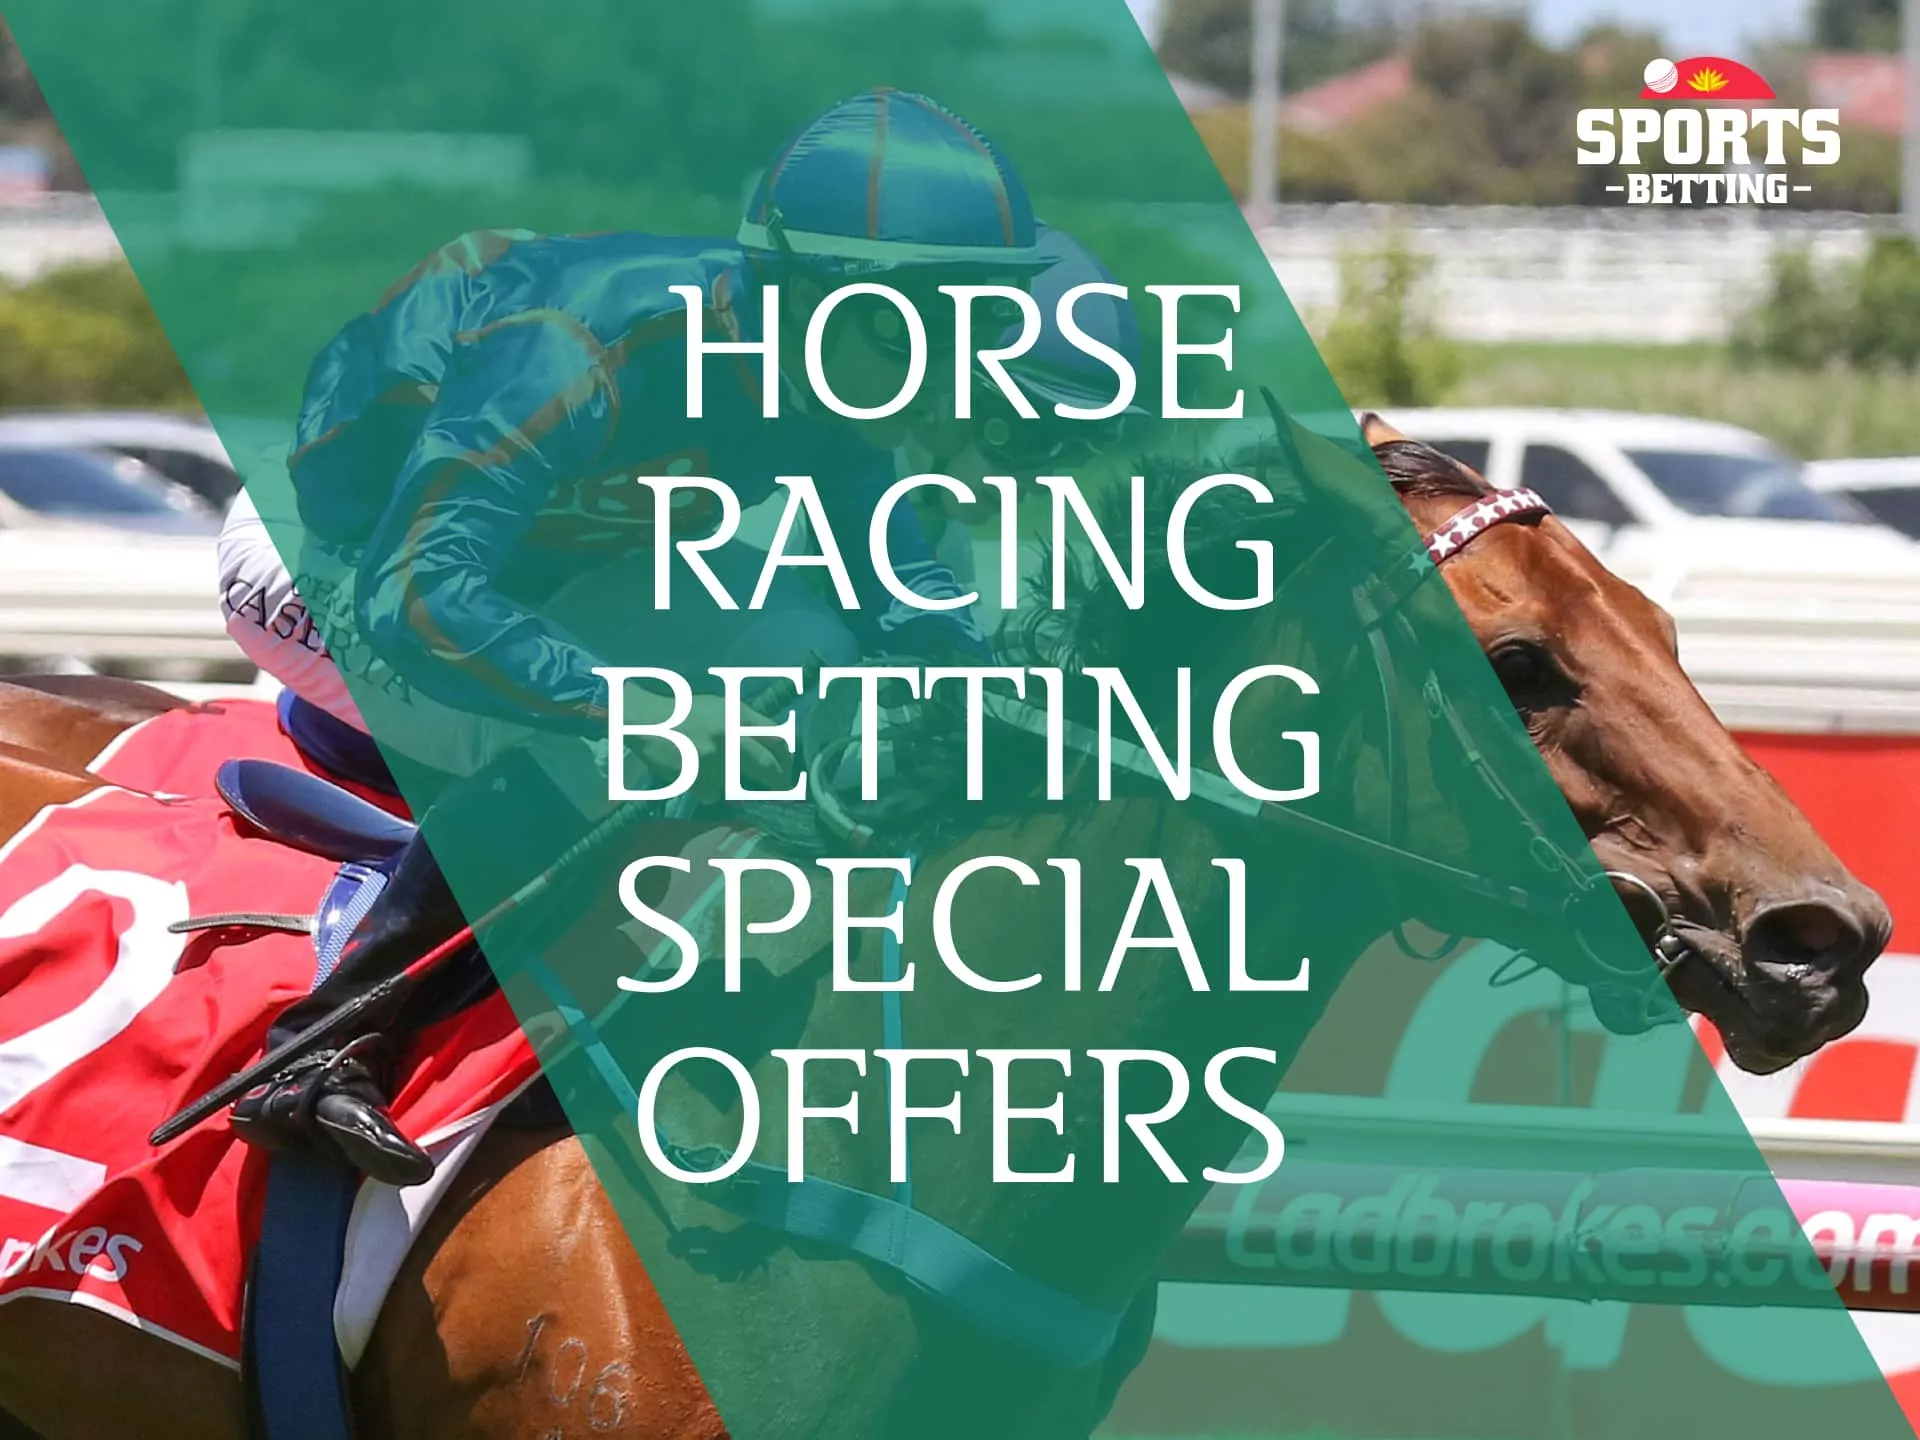 Bookmakers offer their customers various incentives in the form of bonuses.